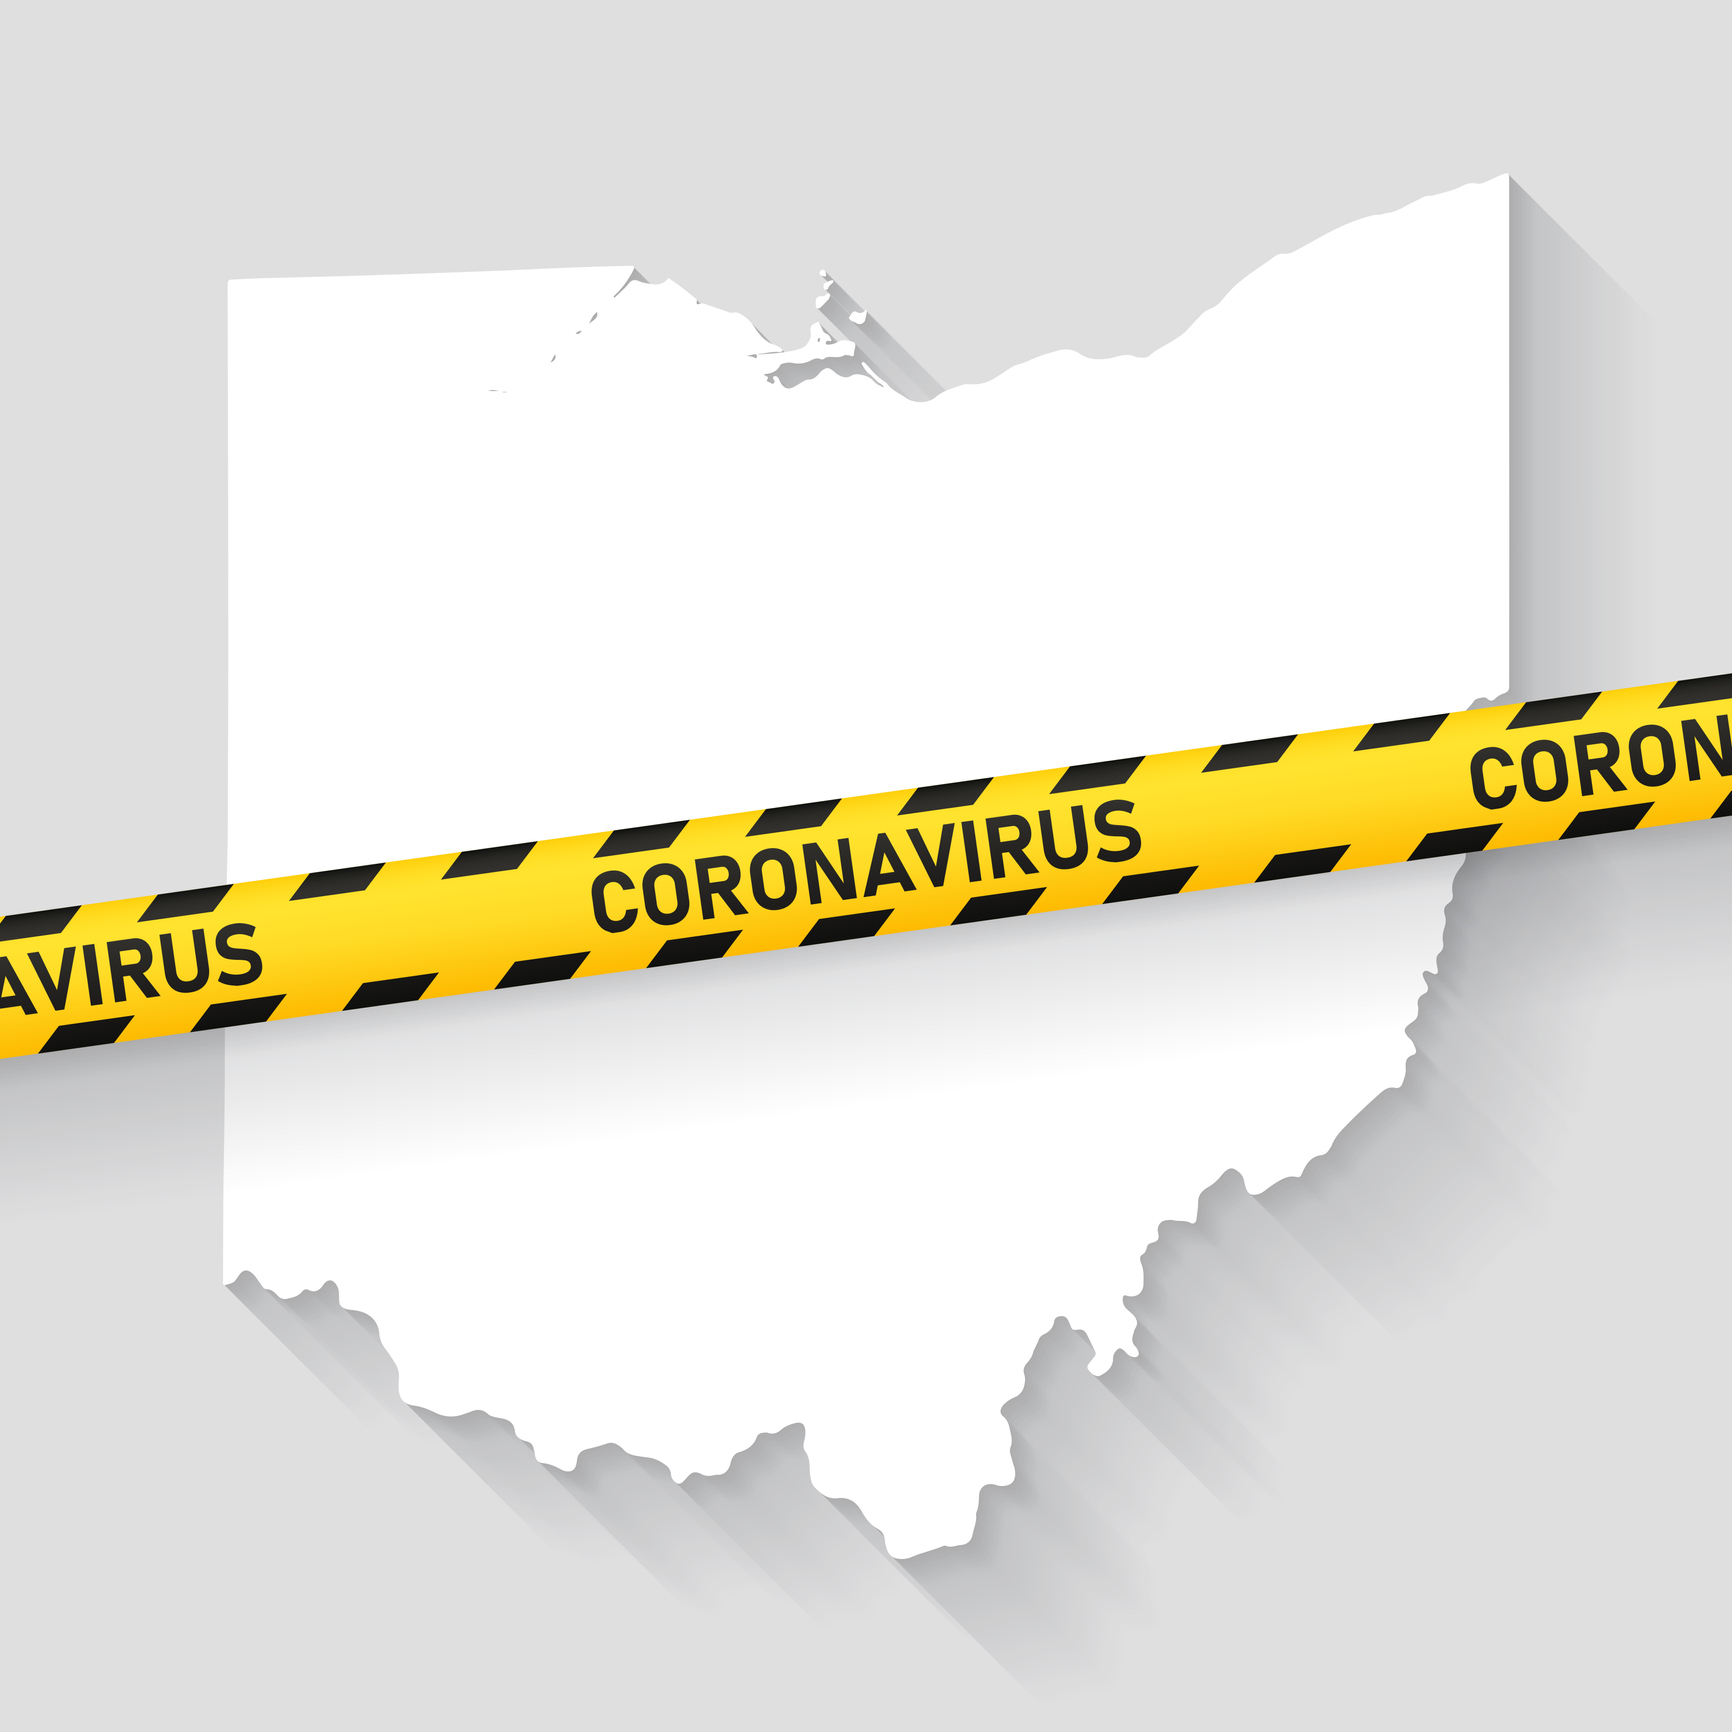 New Ohio Law Provides Broad Immunity from COVID-19 Lawsuits Thumbnail